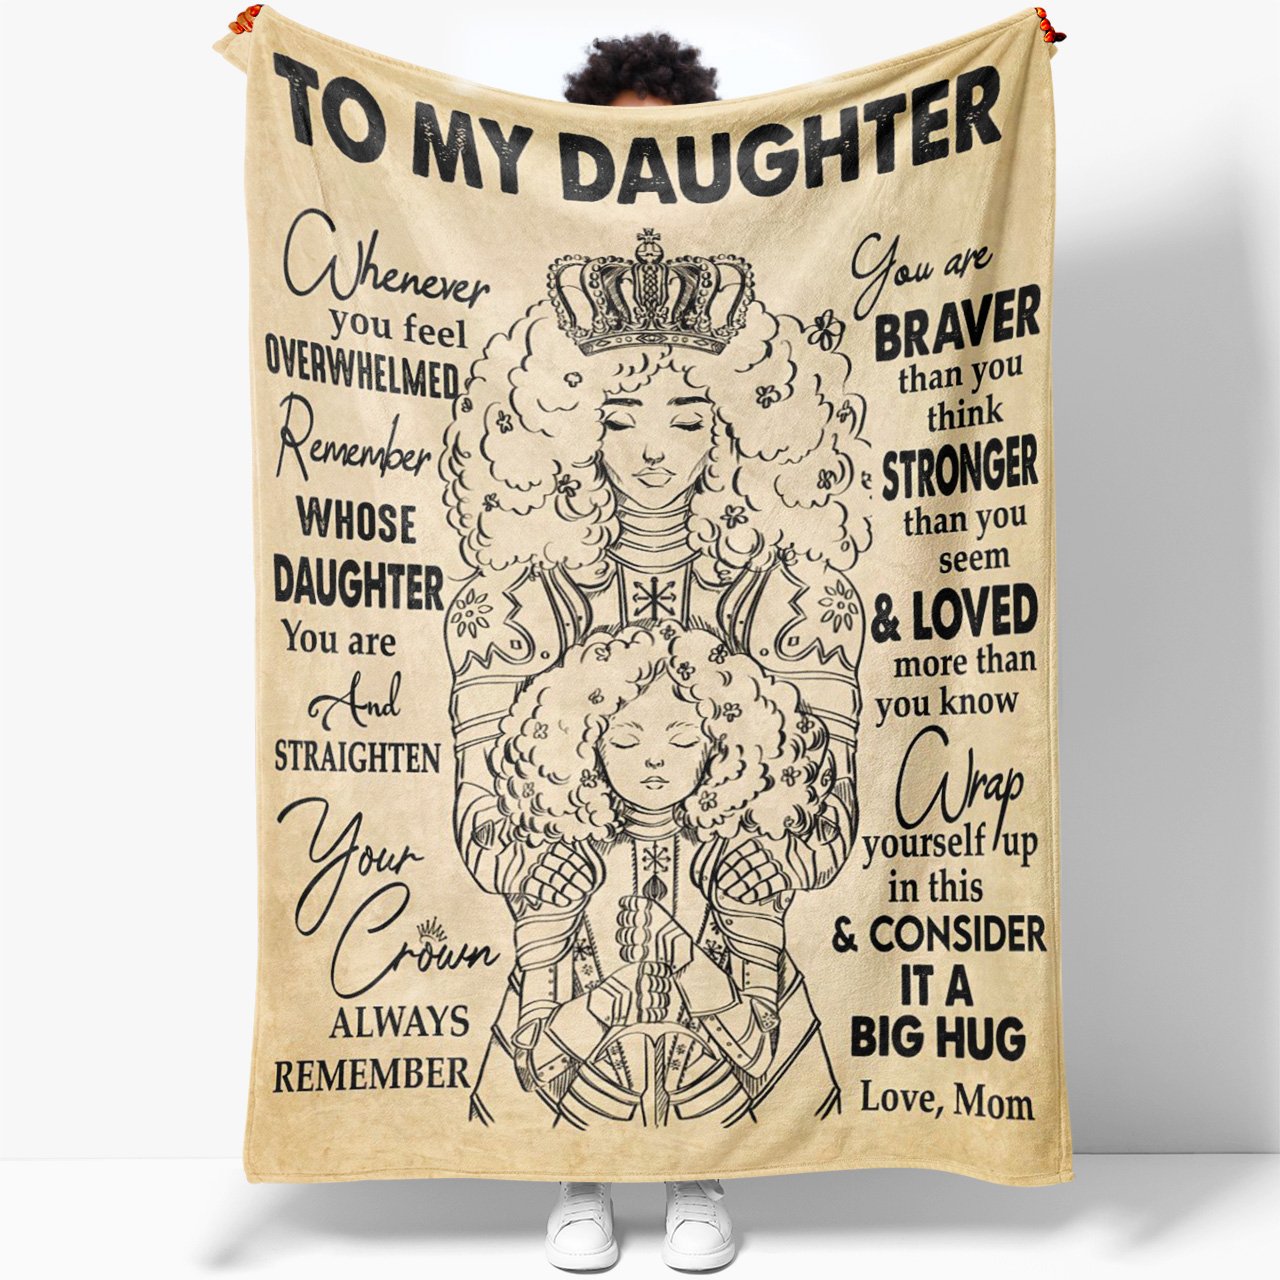 To My Strong Daughter Blanket, Straigthen Your Crown You Are Braver Stronger Blanket, Daddy Daughter Gifts, Graduation Gift Ideas For Daughter